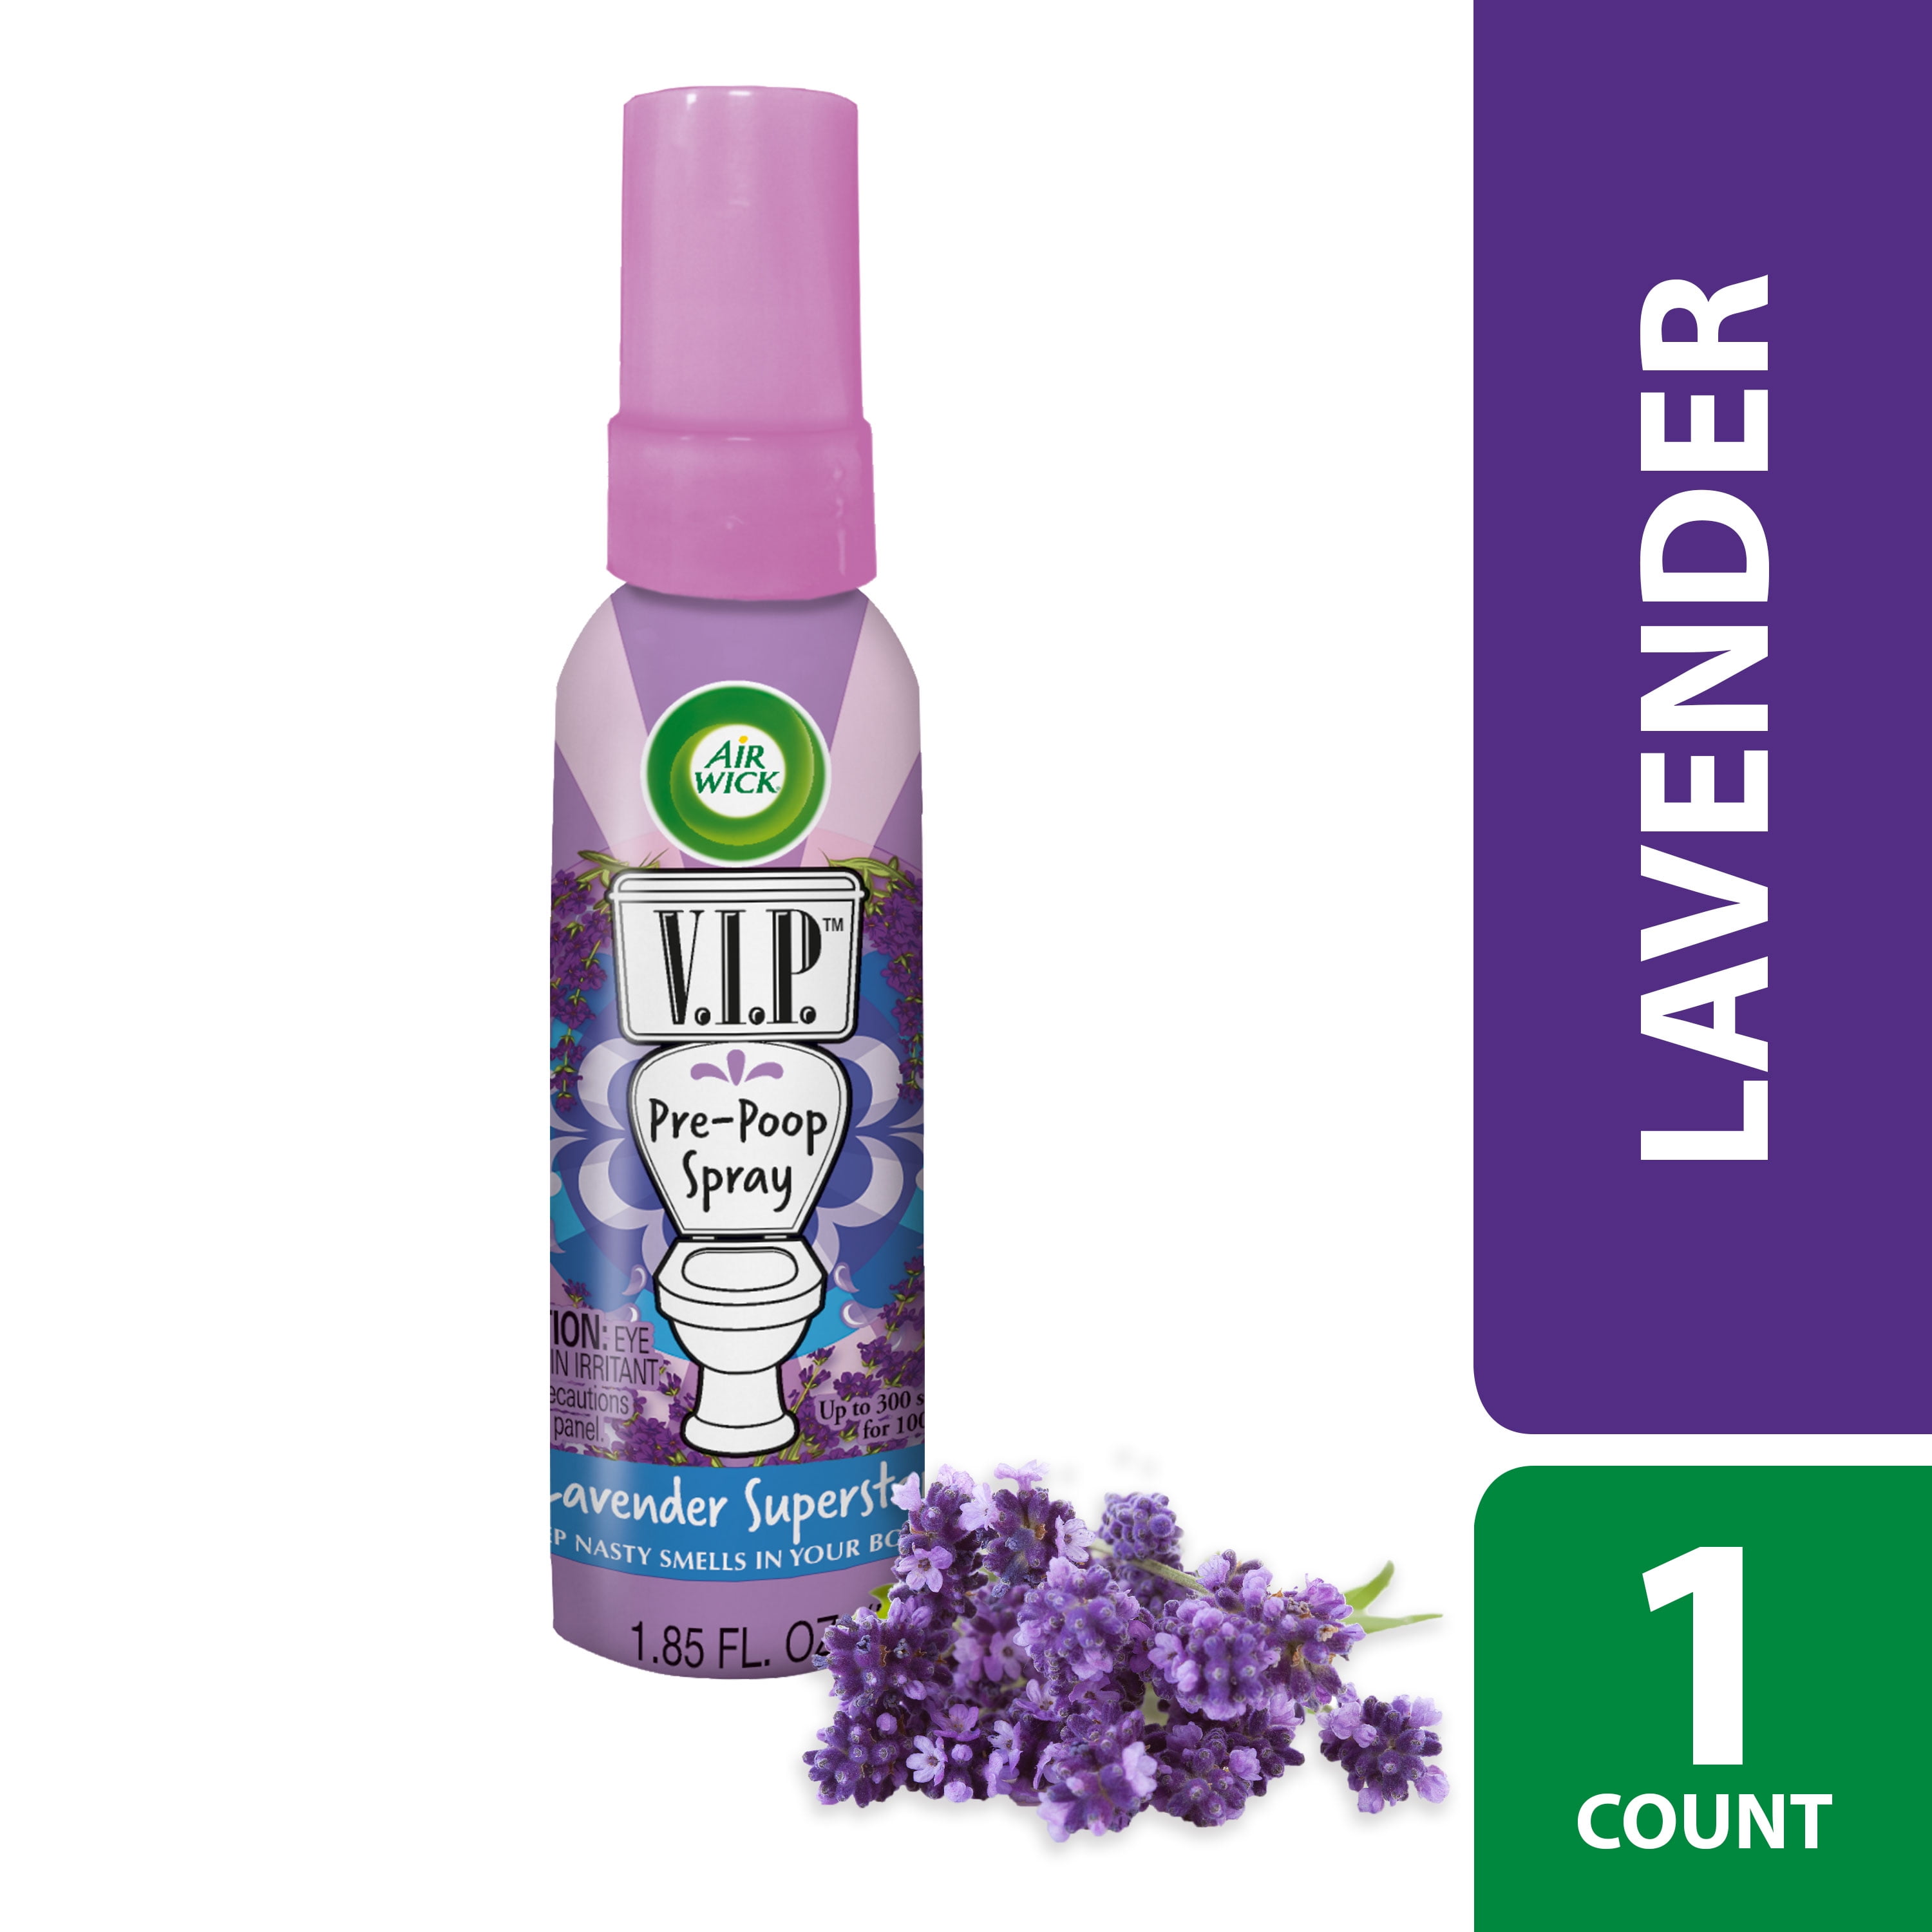 Air Wick V.I.P. Pre-Poop Toilet Spray, 1.85oz, Lavender Superstar Scent, Up  to 100 Uses, Travel size, Contains Essential Oils 